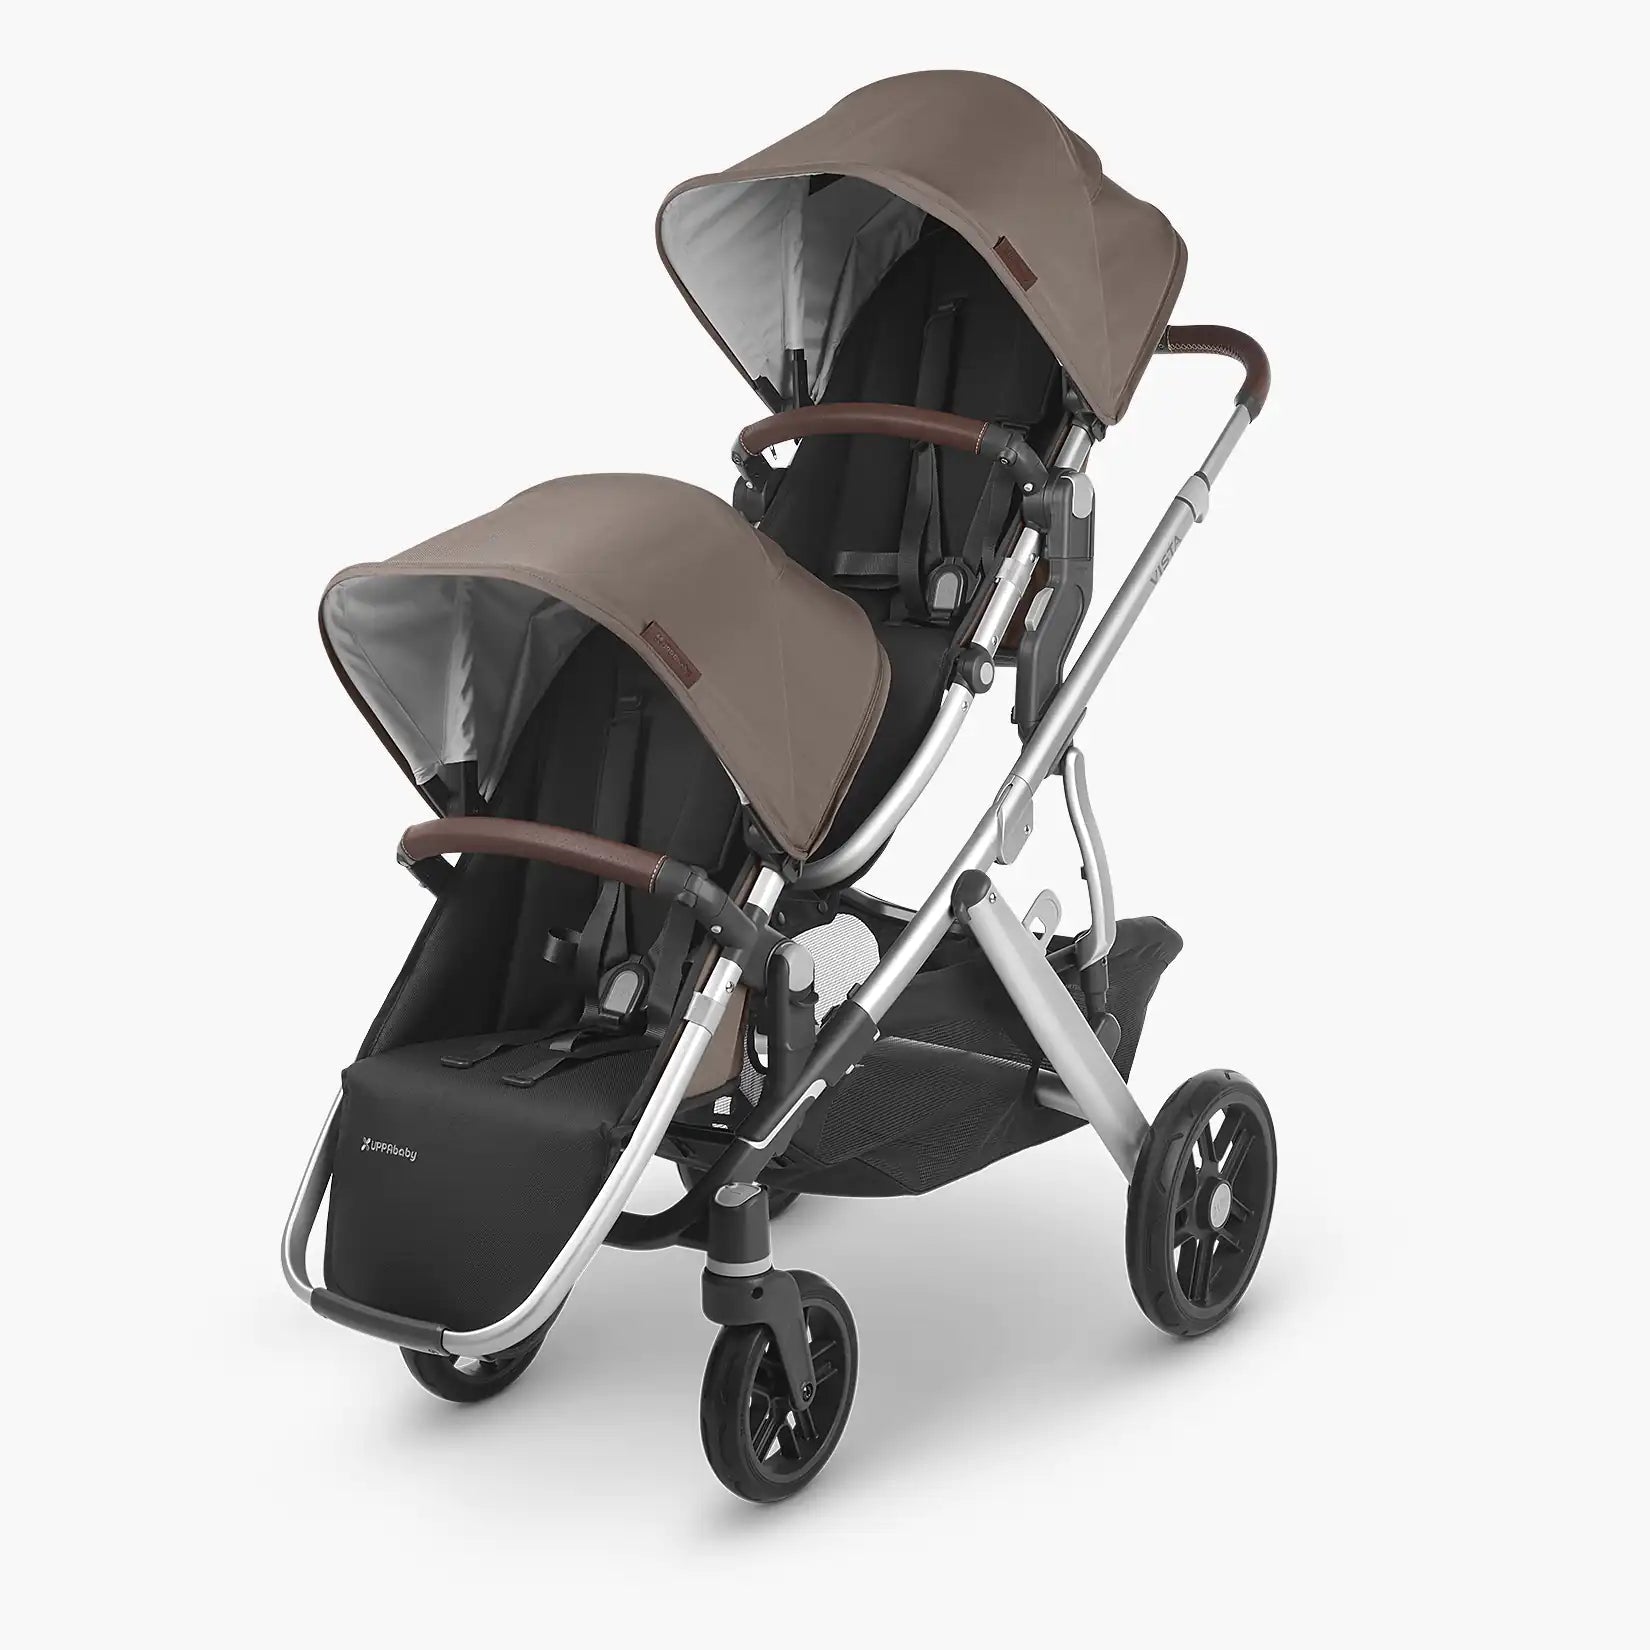 UPPAbaby RumbleSeat V2 - ANB Baby -810030099000$100 - $300